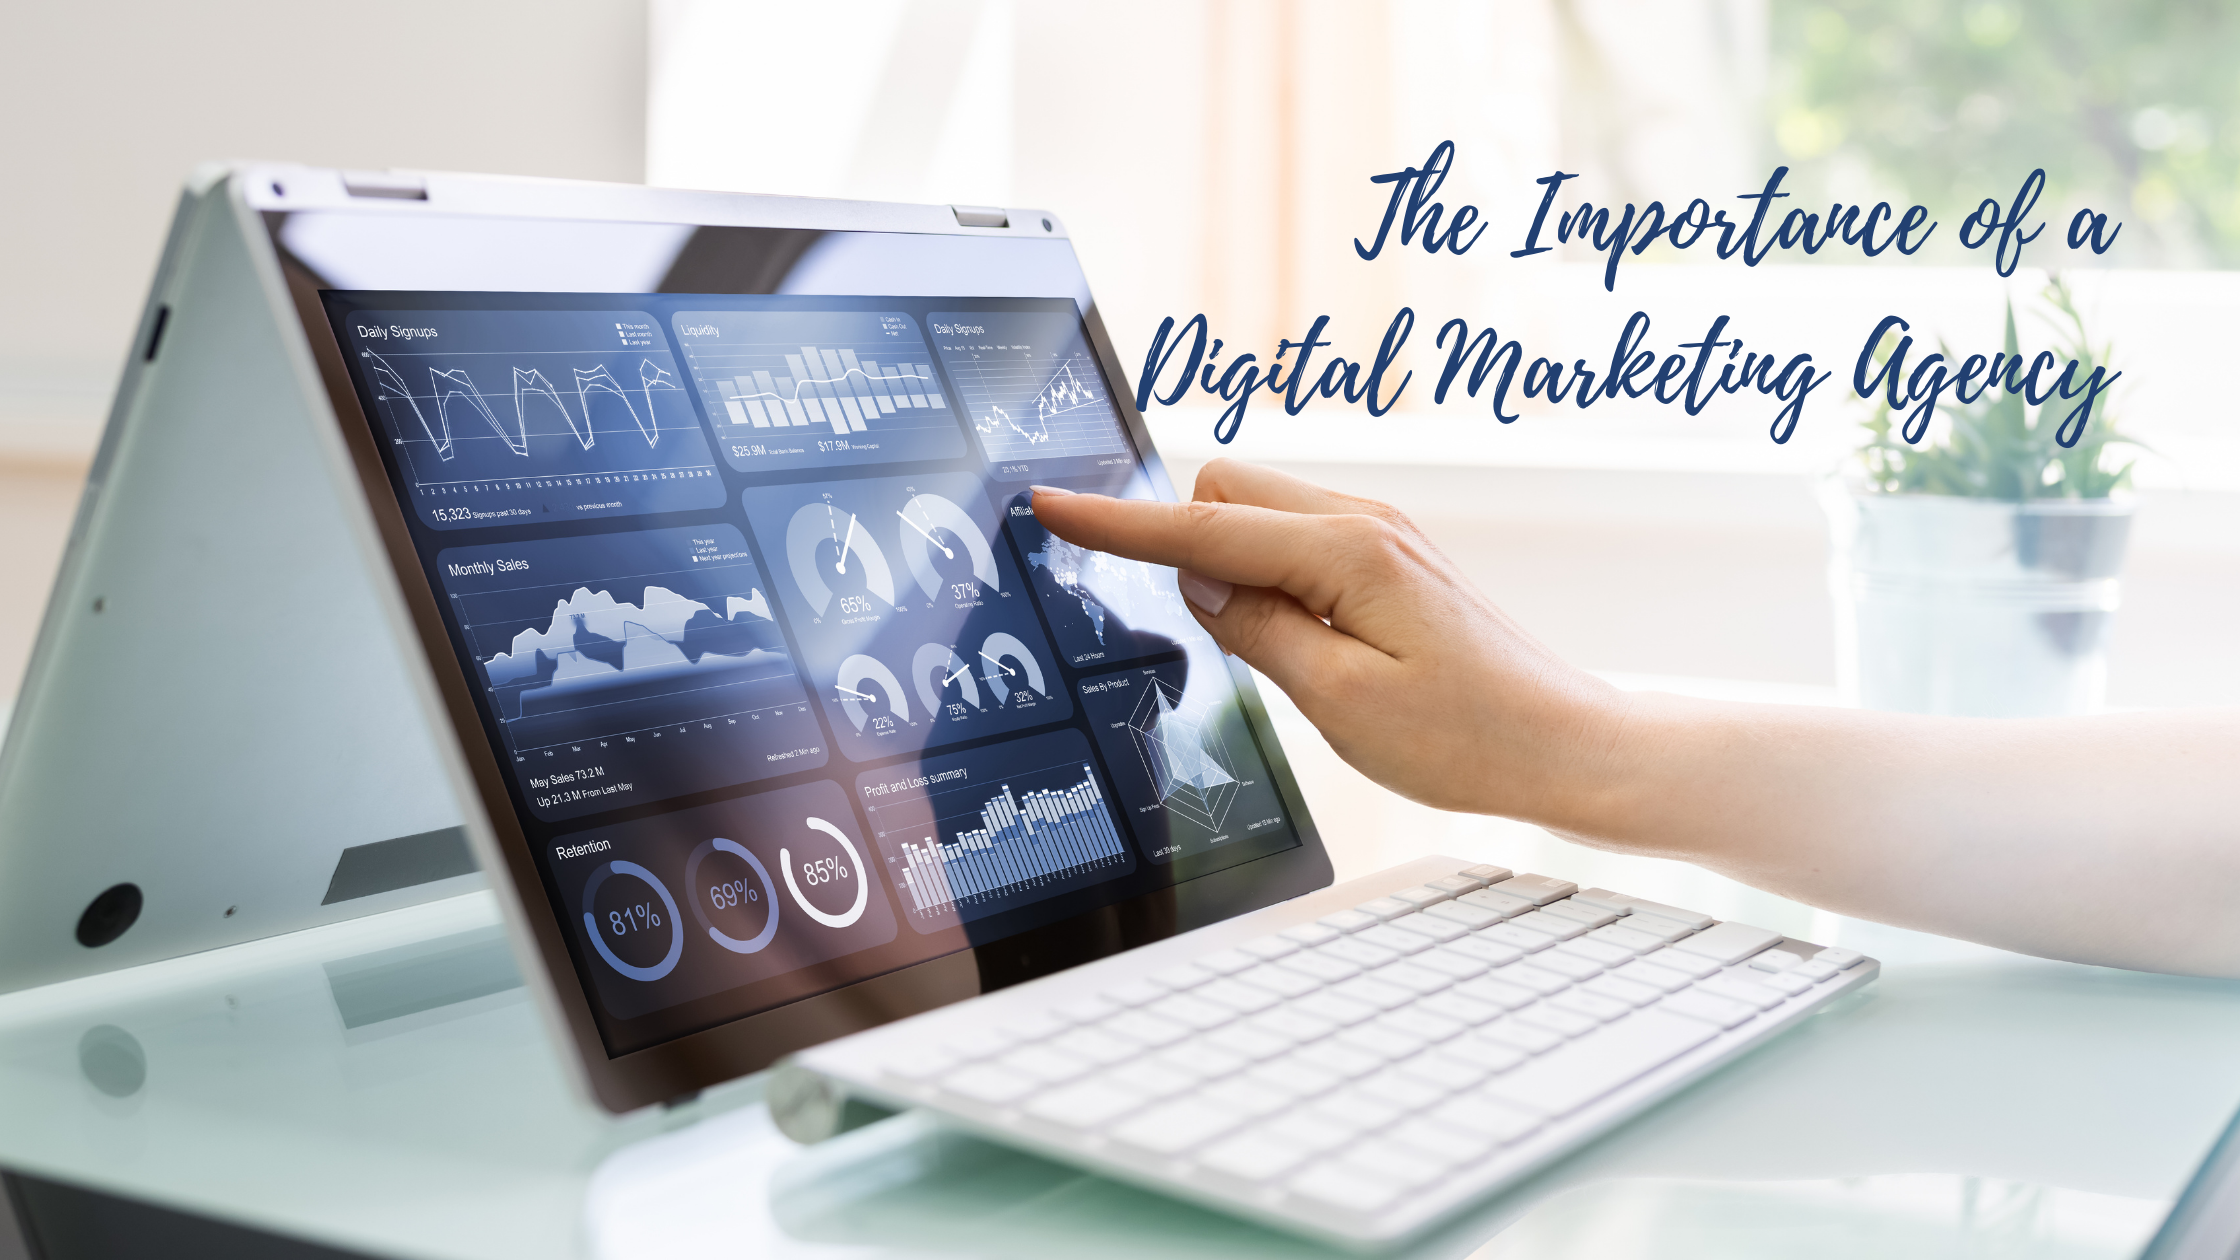 How can a Digital Marketing Agency Benefit your Business